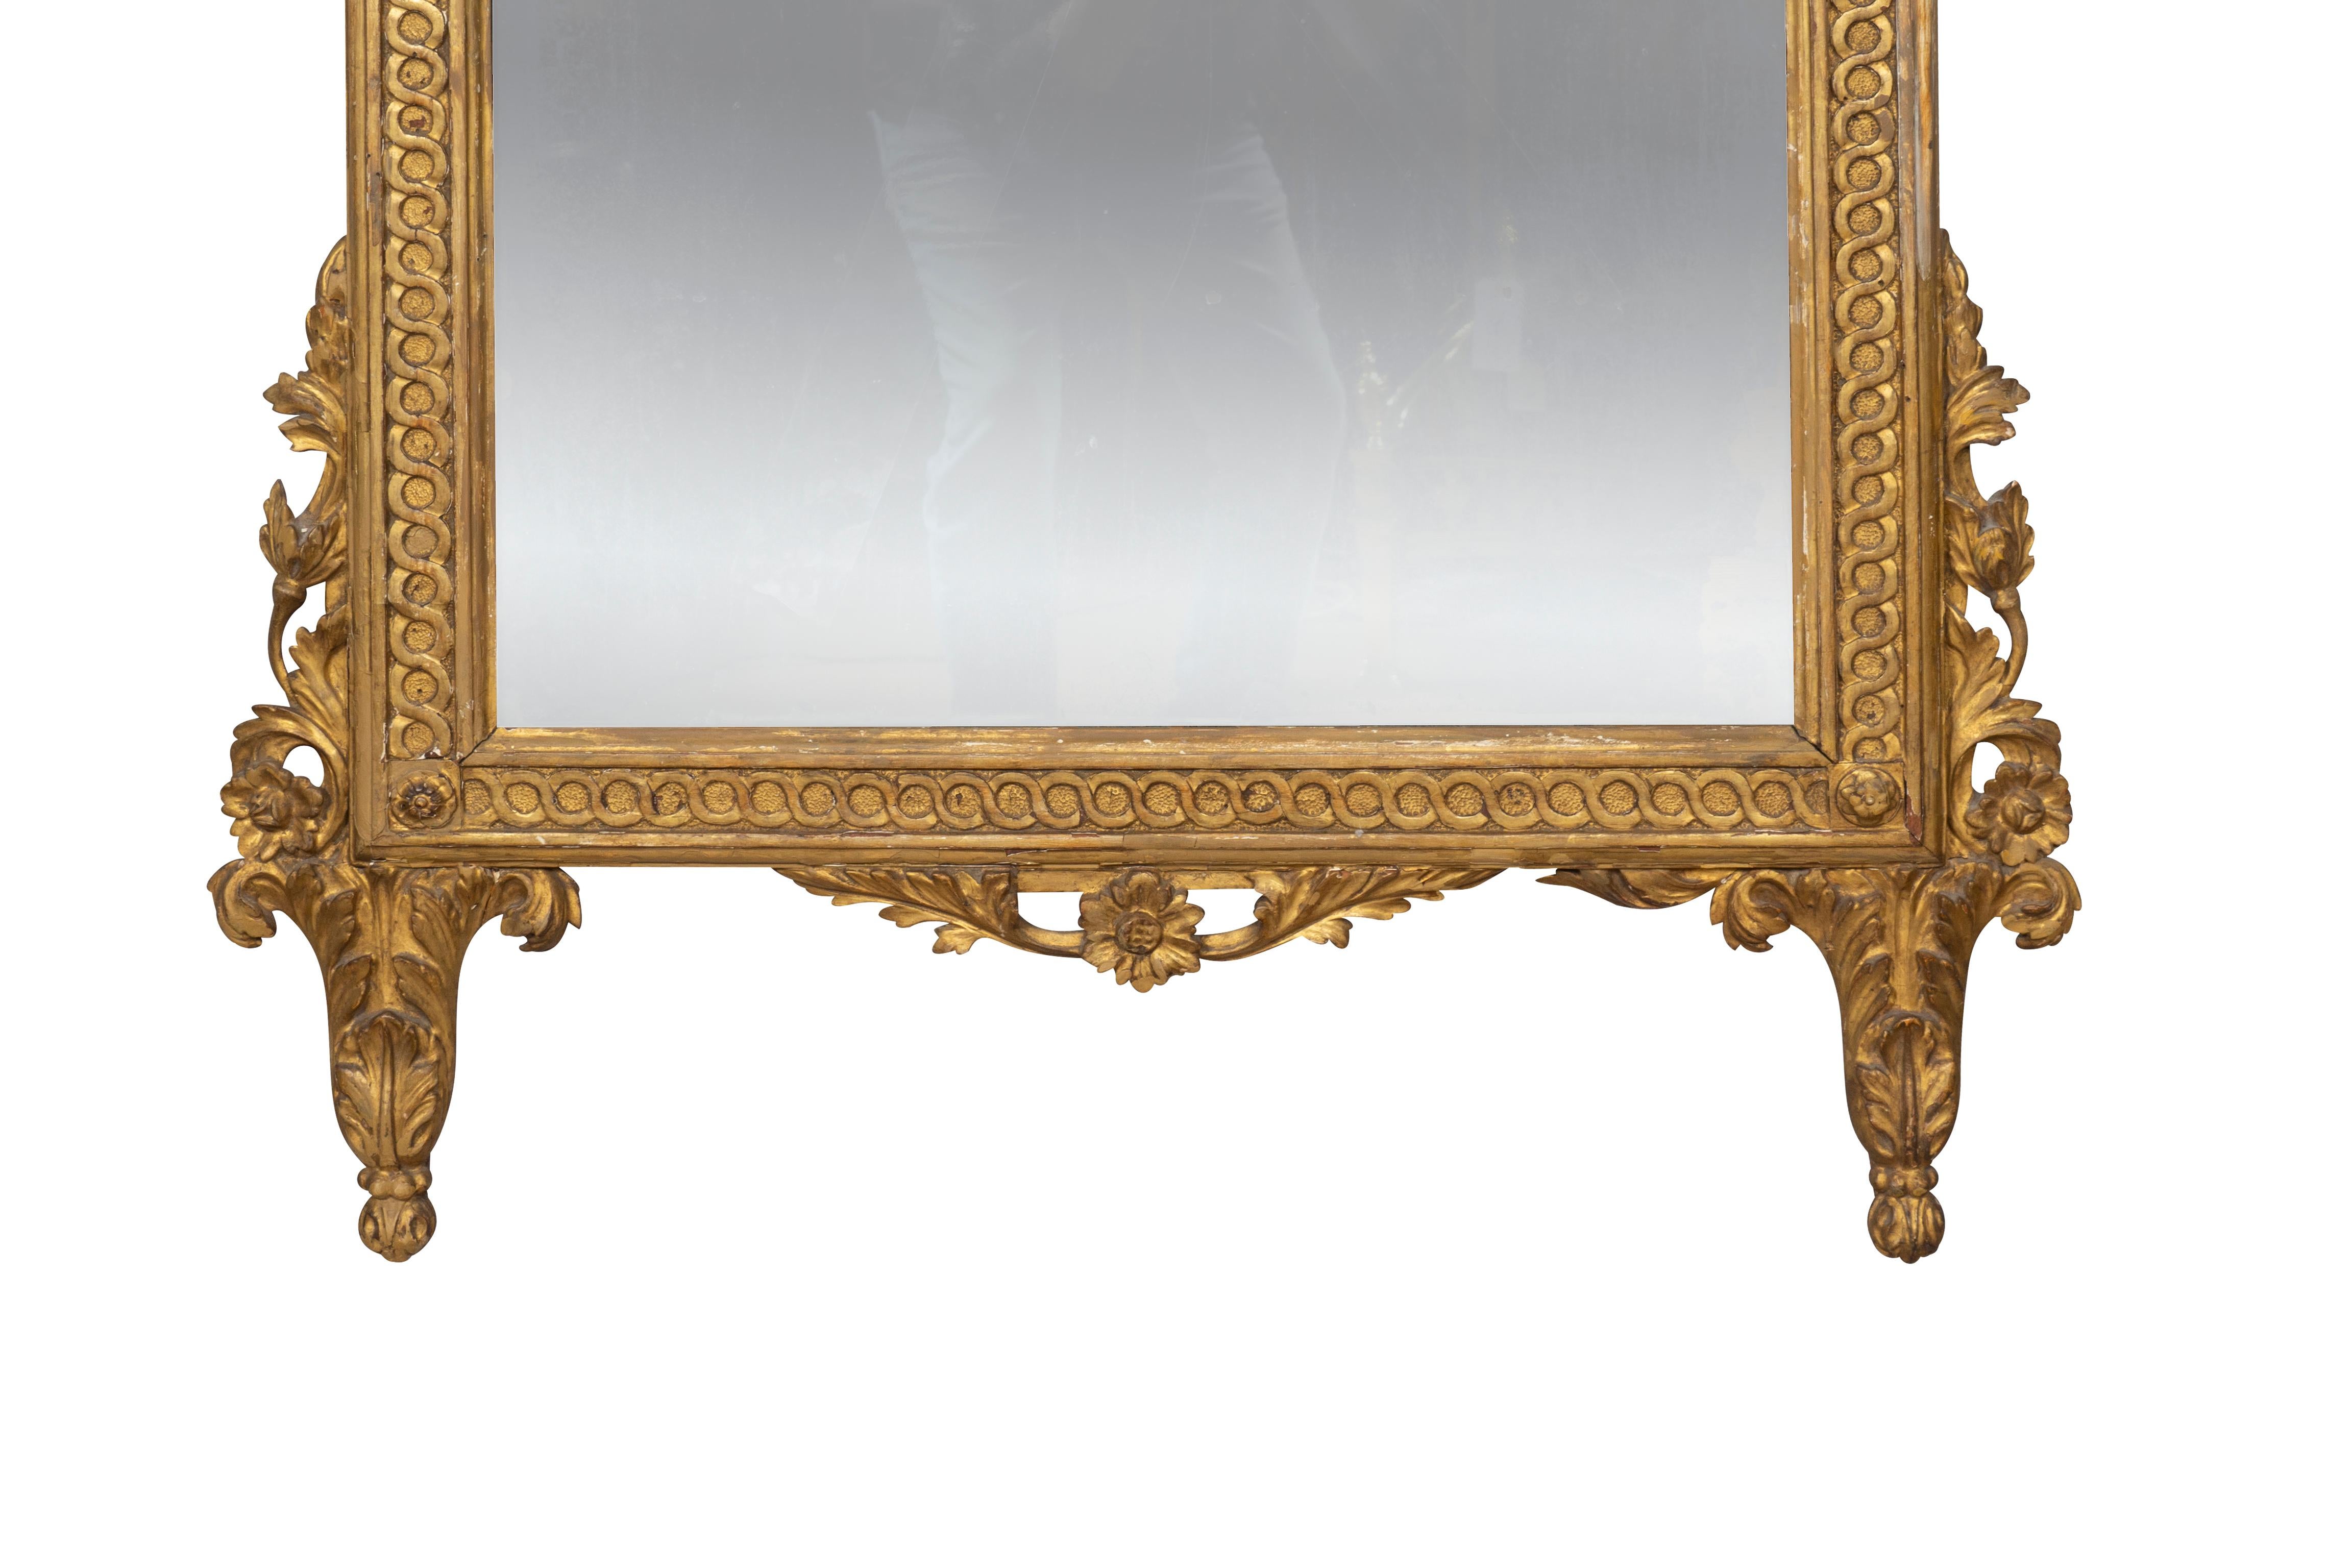 With original wonderful surface gilding. The crest with urn of flowers and trailing arabesques over an original distressed mirror plate that we will replace if requested. The frame with guilloche border. The bottom of the mirror with leaf form feet.